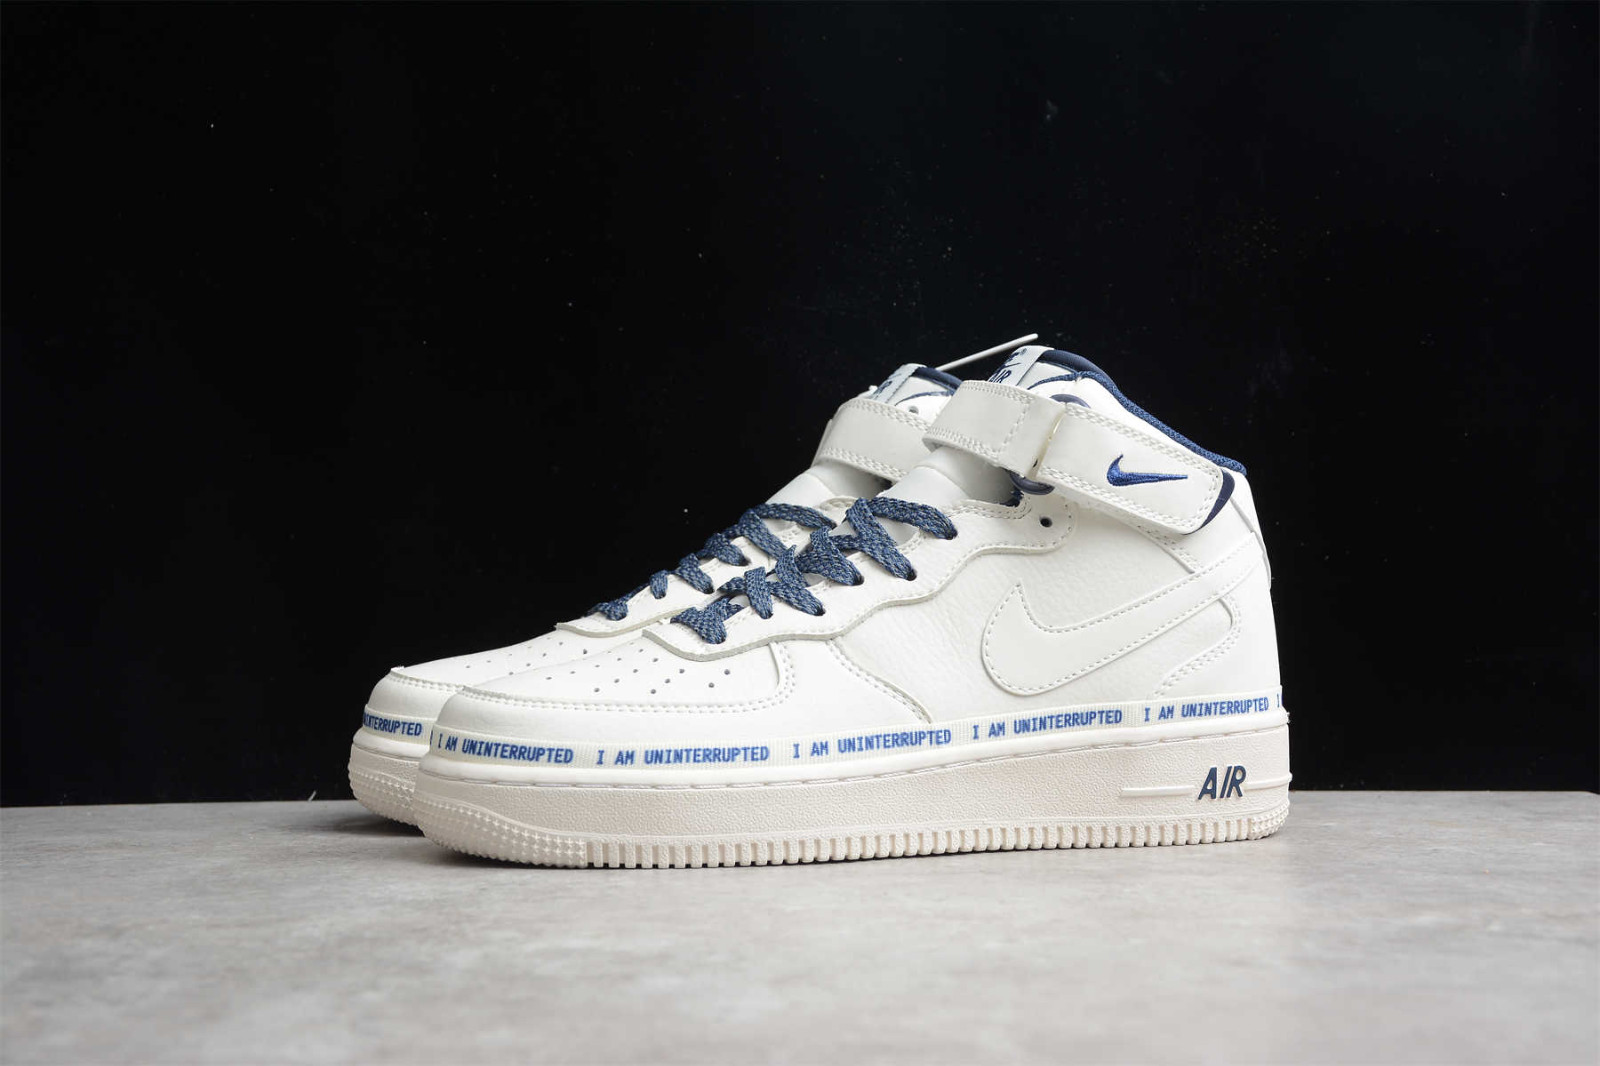 consumirse simpático Invertir Uninterrupted x Nike pack Air Force 1 07 Mid White Blue NU8802 - 303 - old  nike pack dunks grey and salmon color sheet 2017 - StclaircomoShops